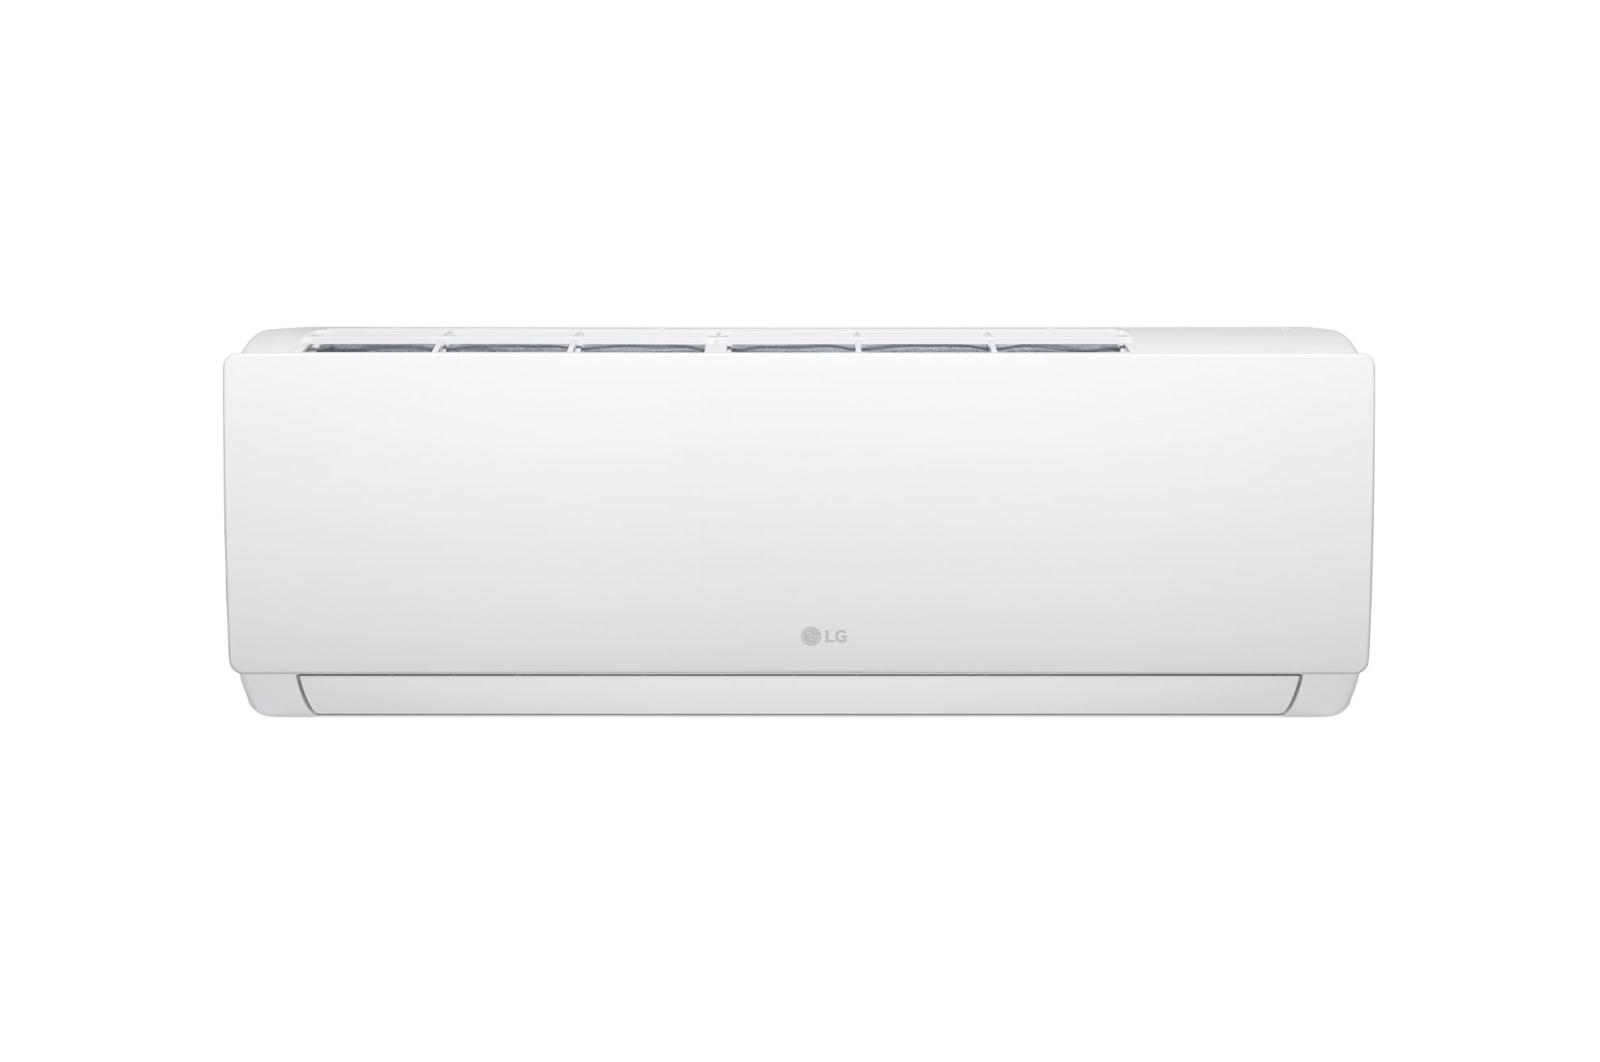 LG Hero Split Air Conditioner, 2.25HP, Cooling and Heating, Inverter Motor, White - S4-H18TZAAE